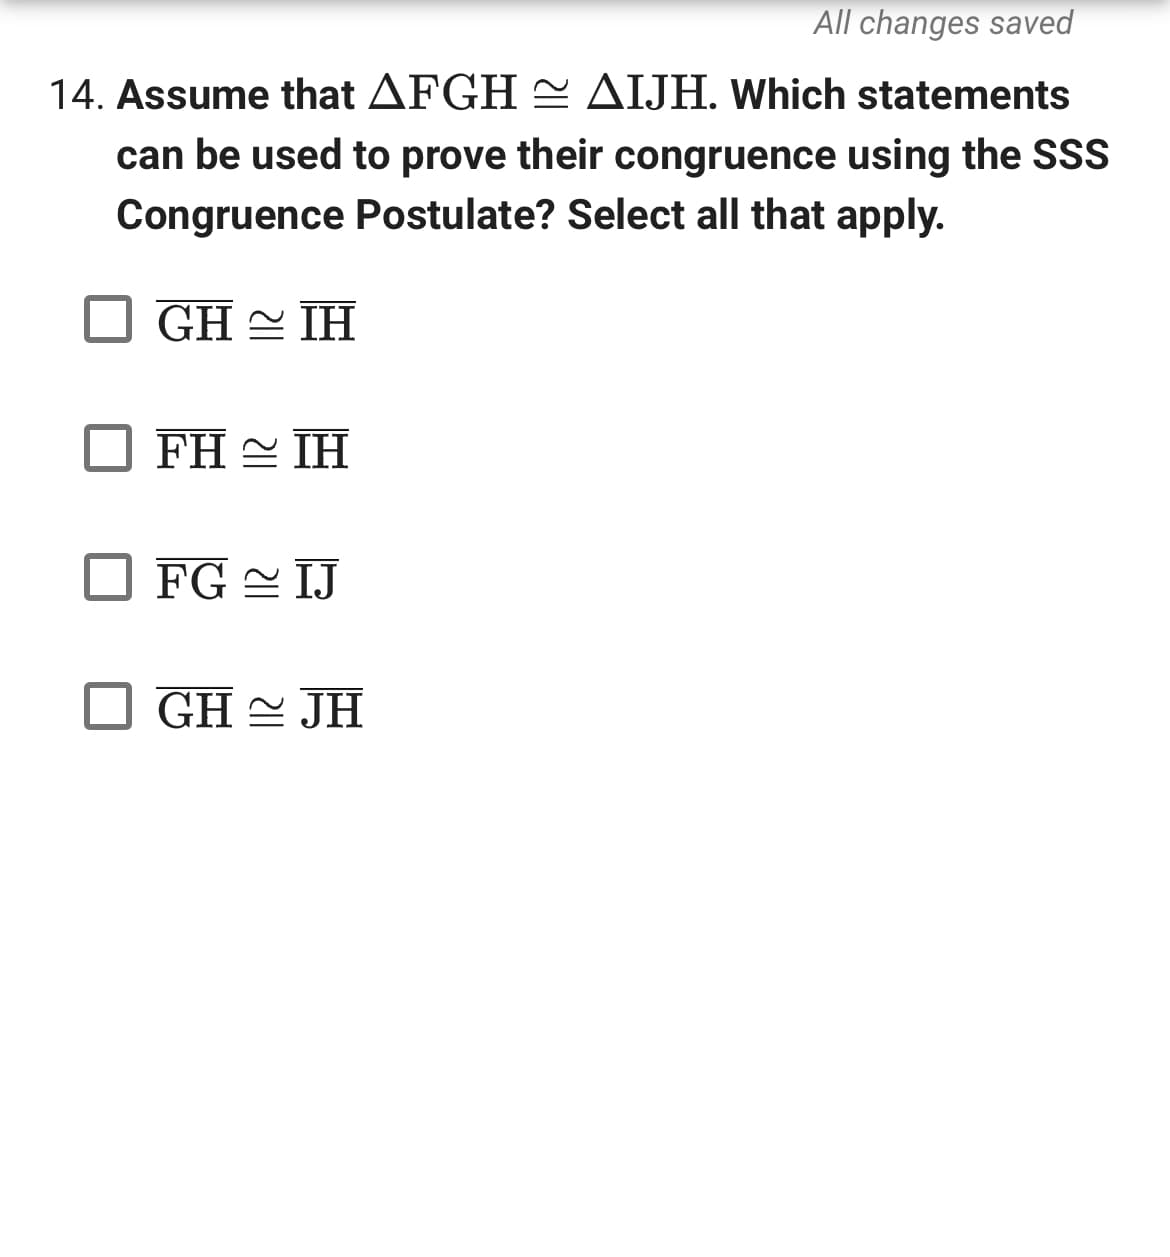 All changes saved
14. Assume that AFGH ~ AIJH. Which statements
can be used to prove their congruence using the SSS
Congruence Postulate? Select all that apply.
GHIH
FH ~ IH
FG IJ
GH~ JH